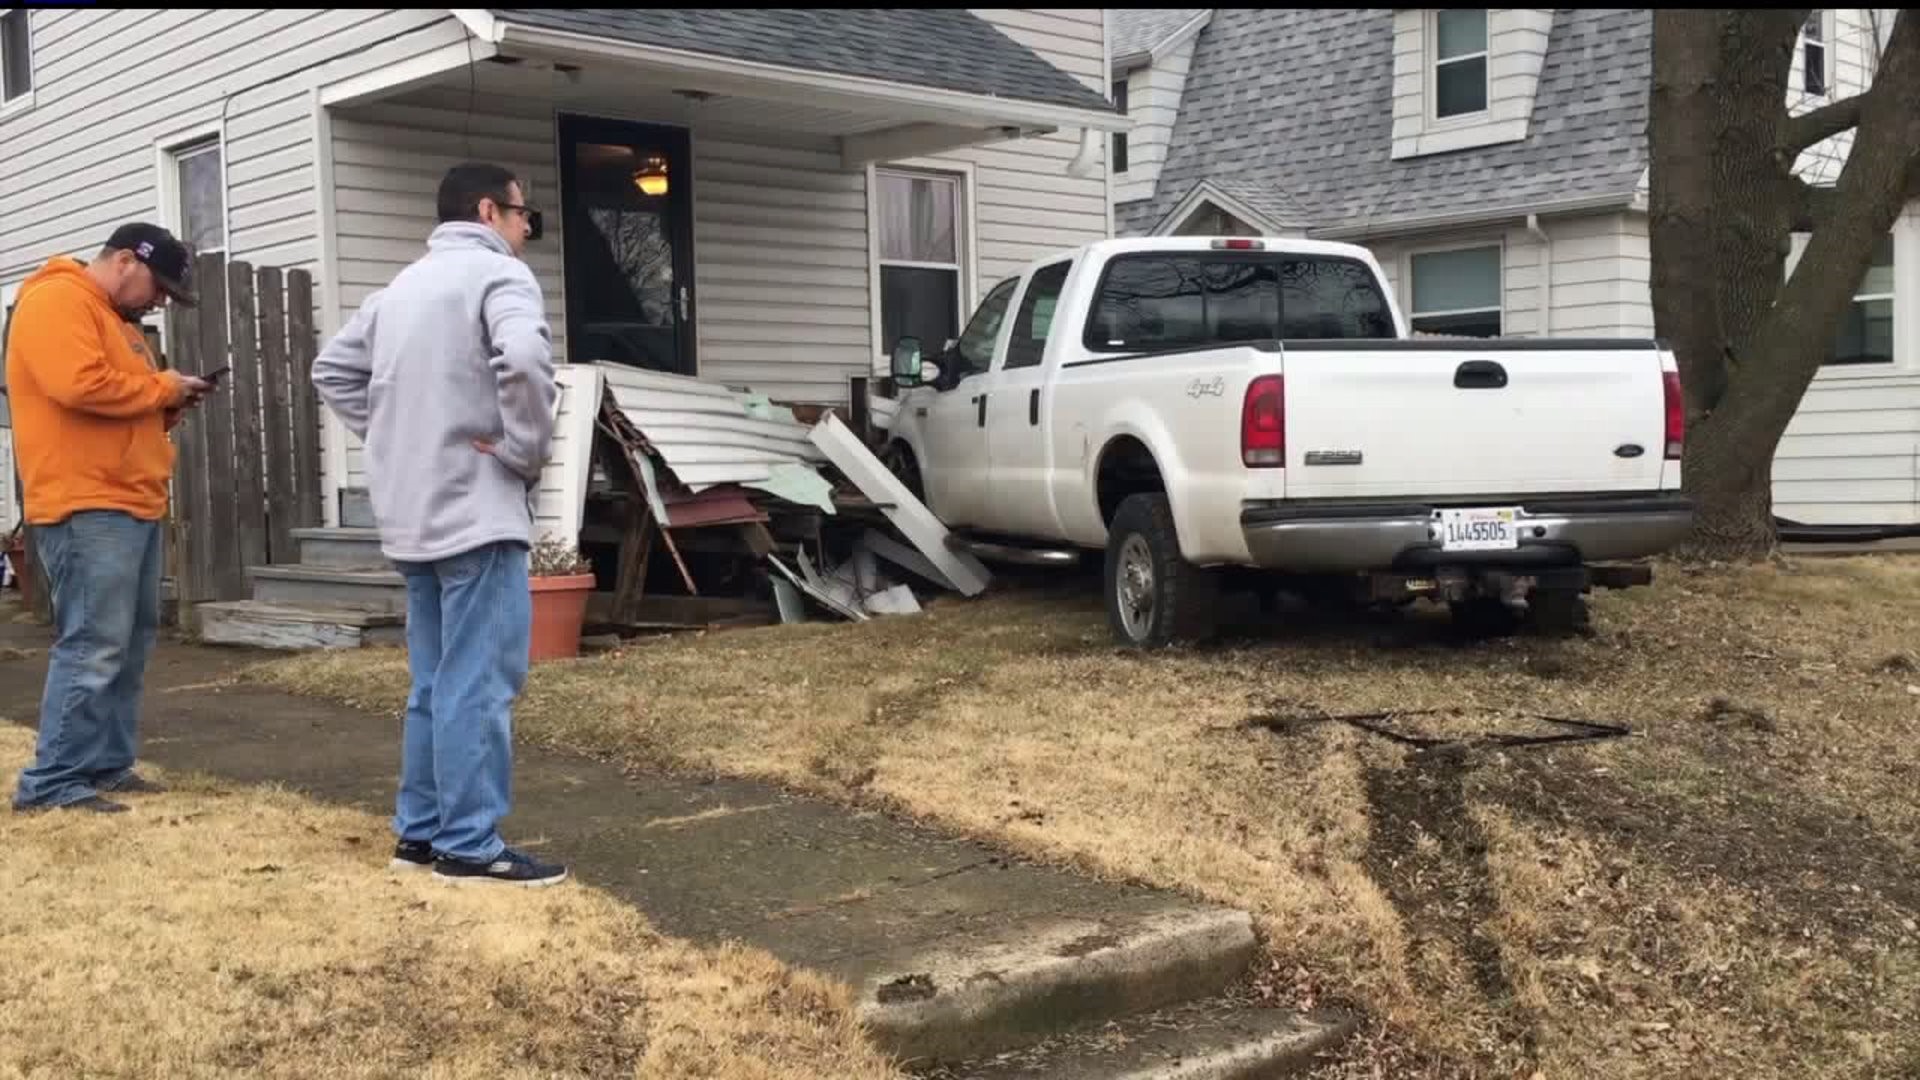 House struck by truck in Moline